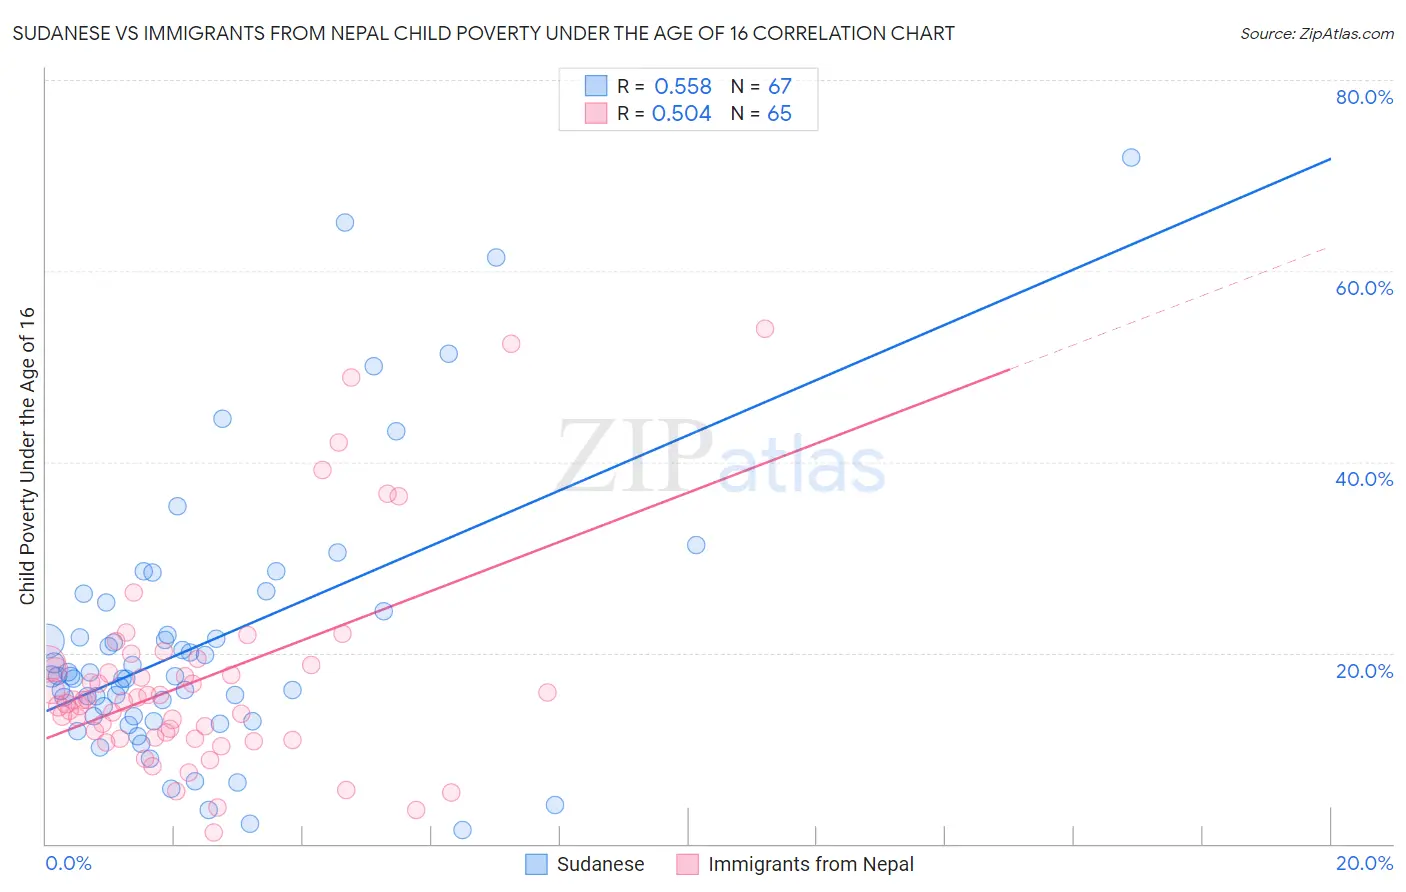 Sudanese vs Immigrants from Nepal Child Poverty Under the Age of 16